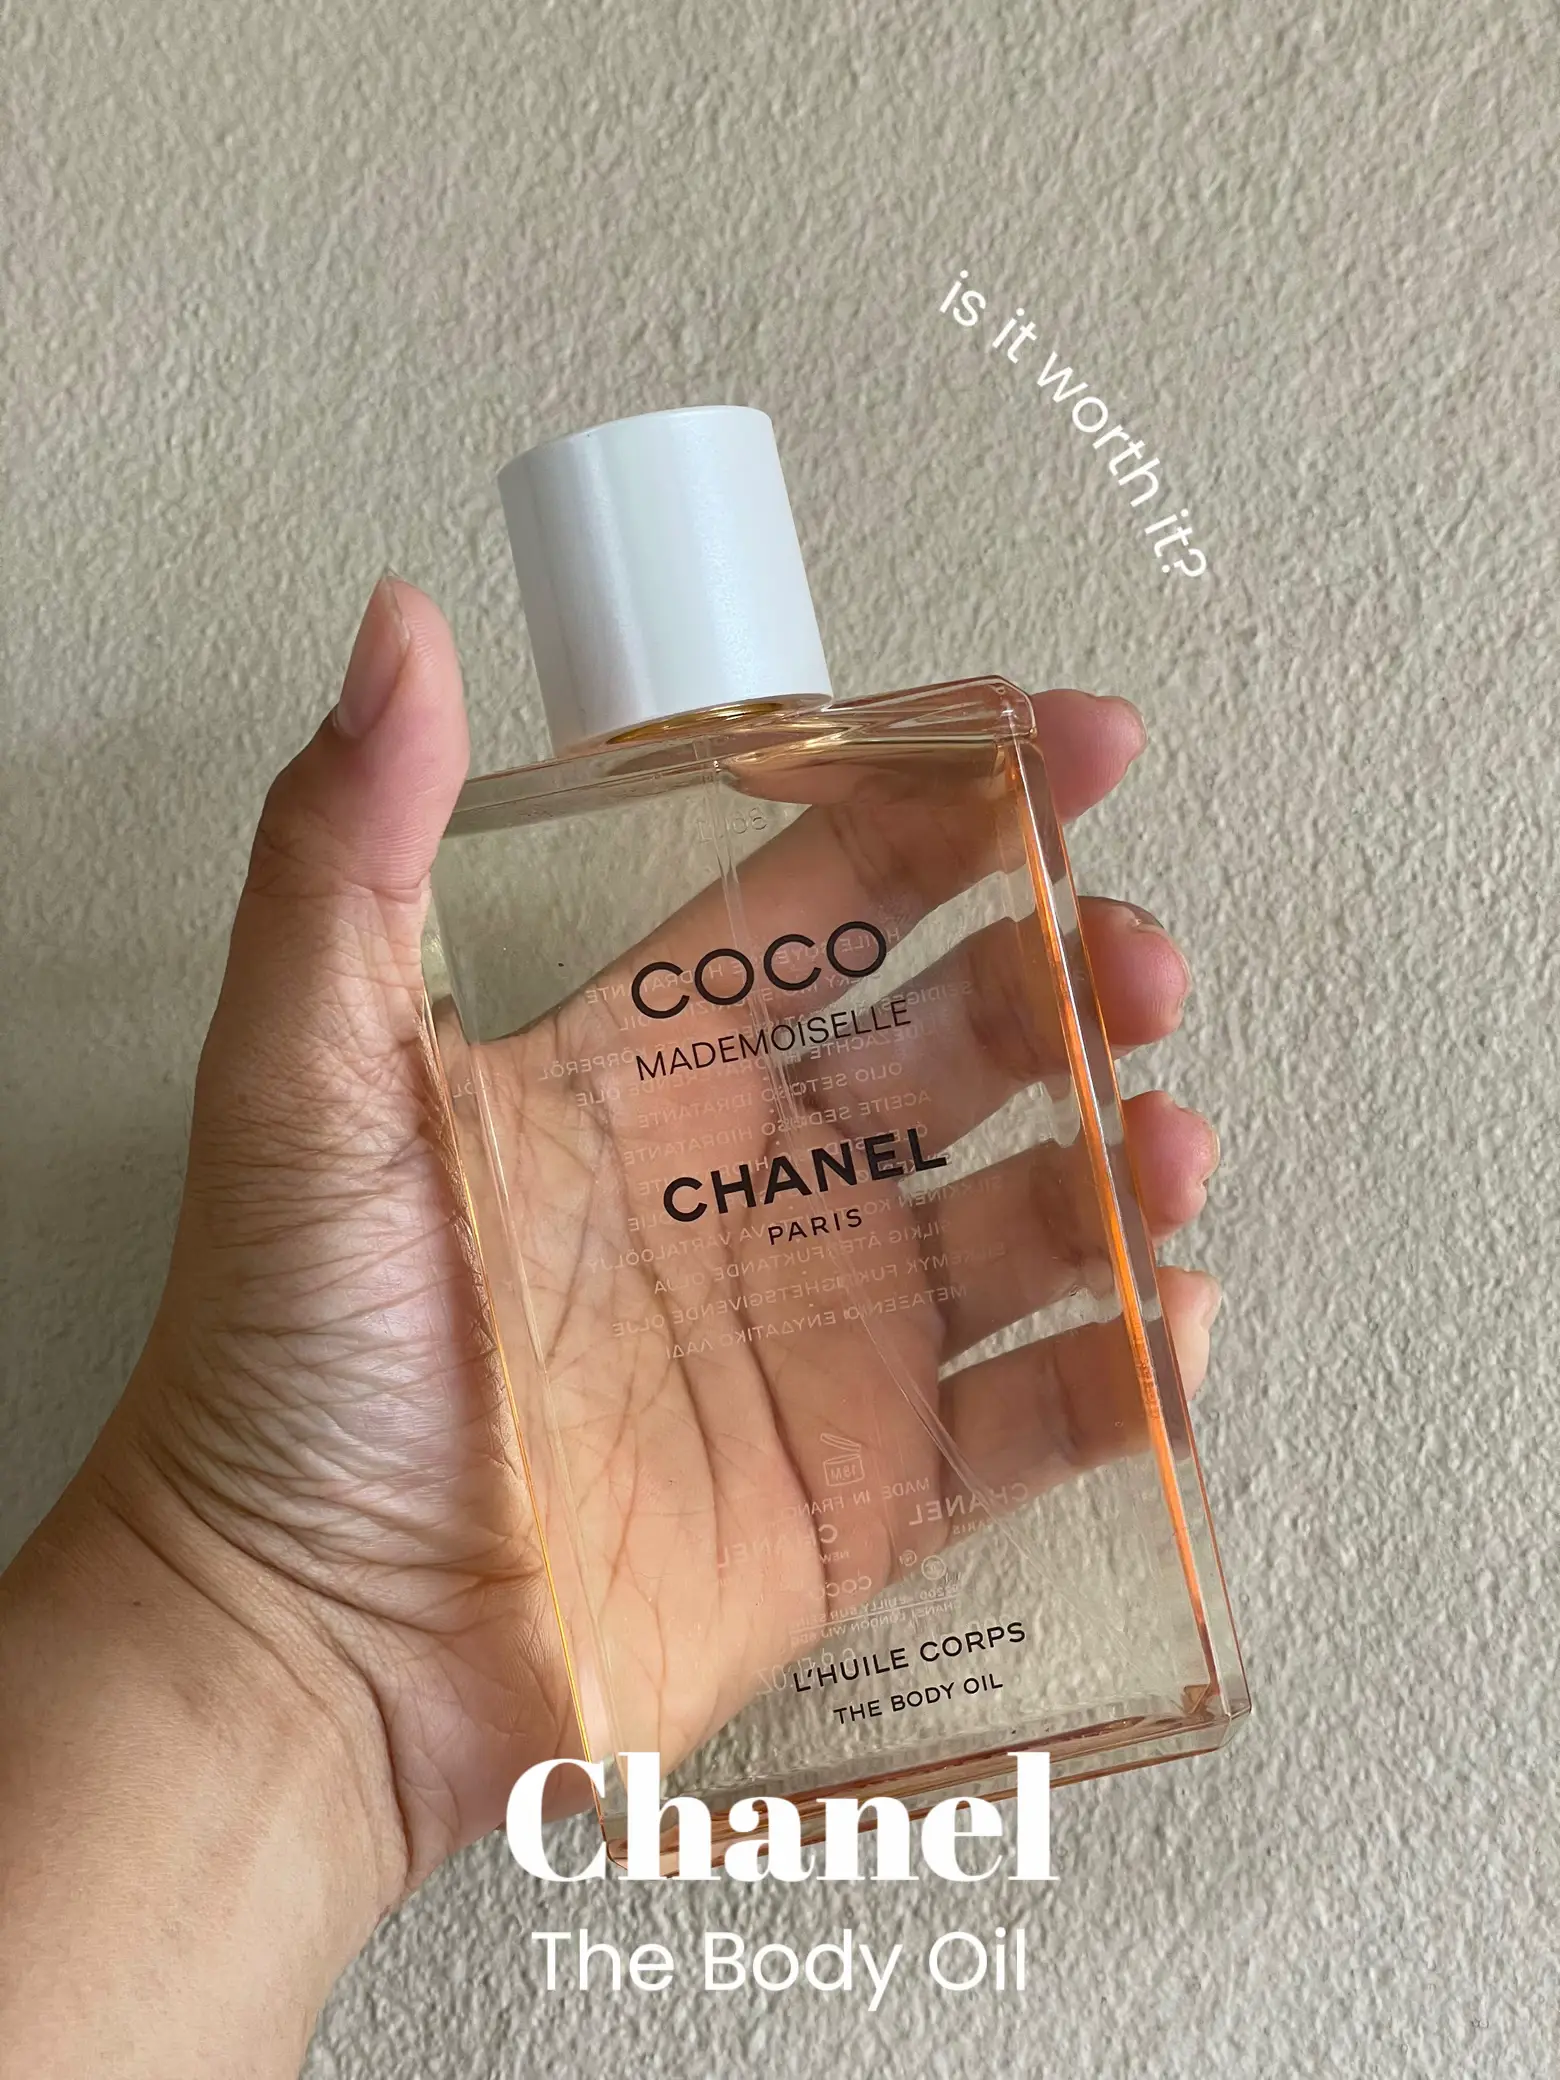 Chanel Body Oil Worth to buy? 🧐